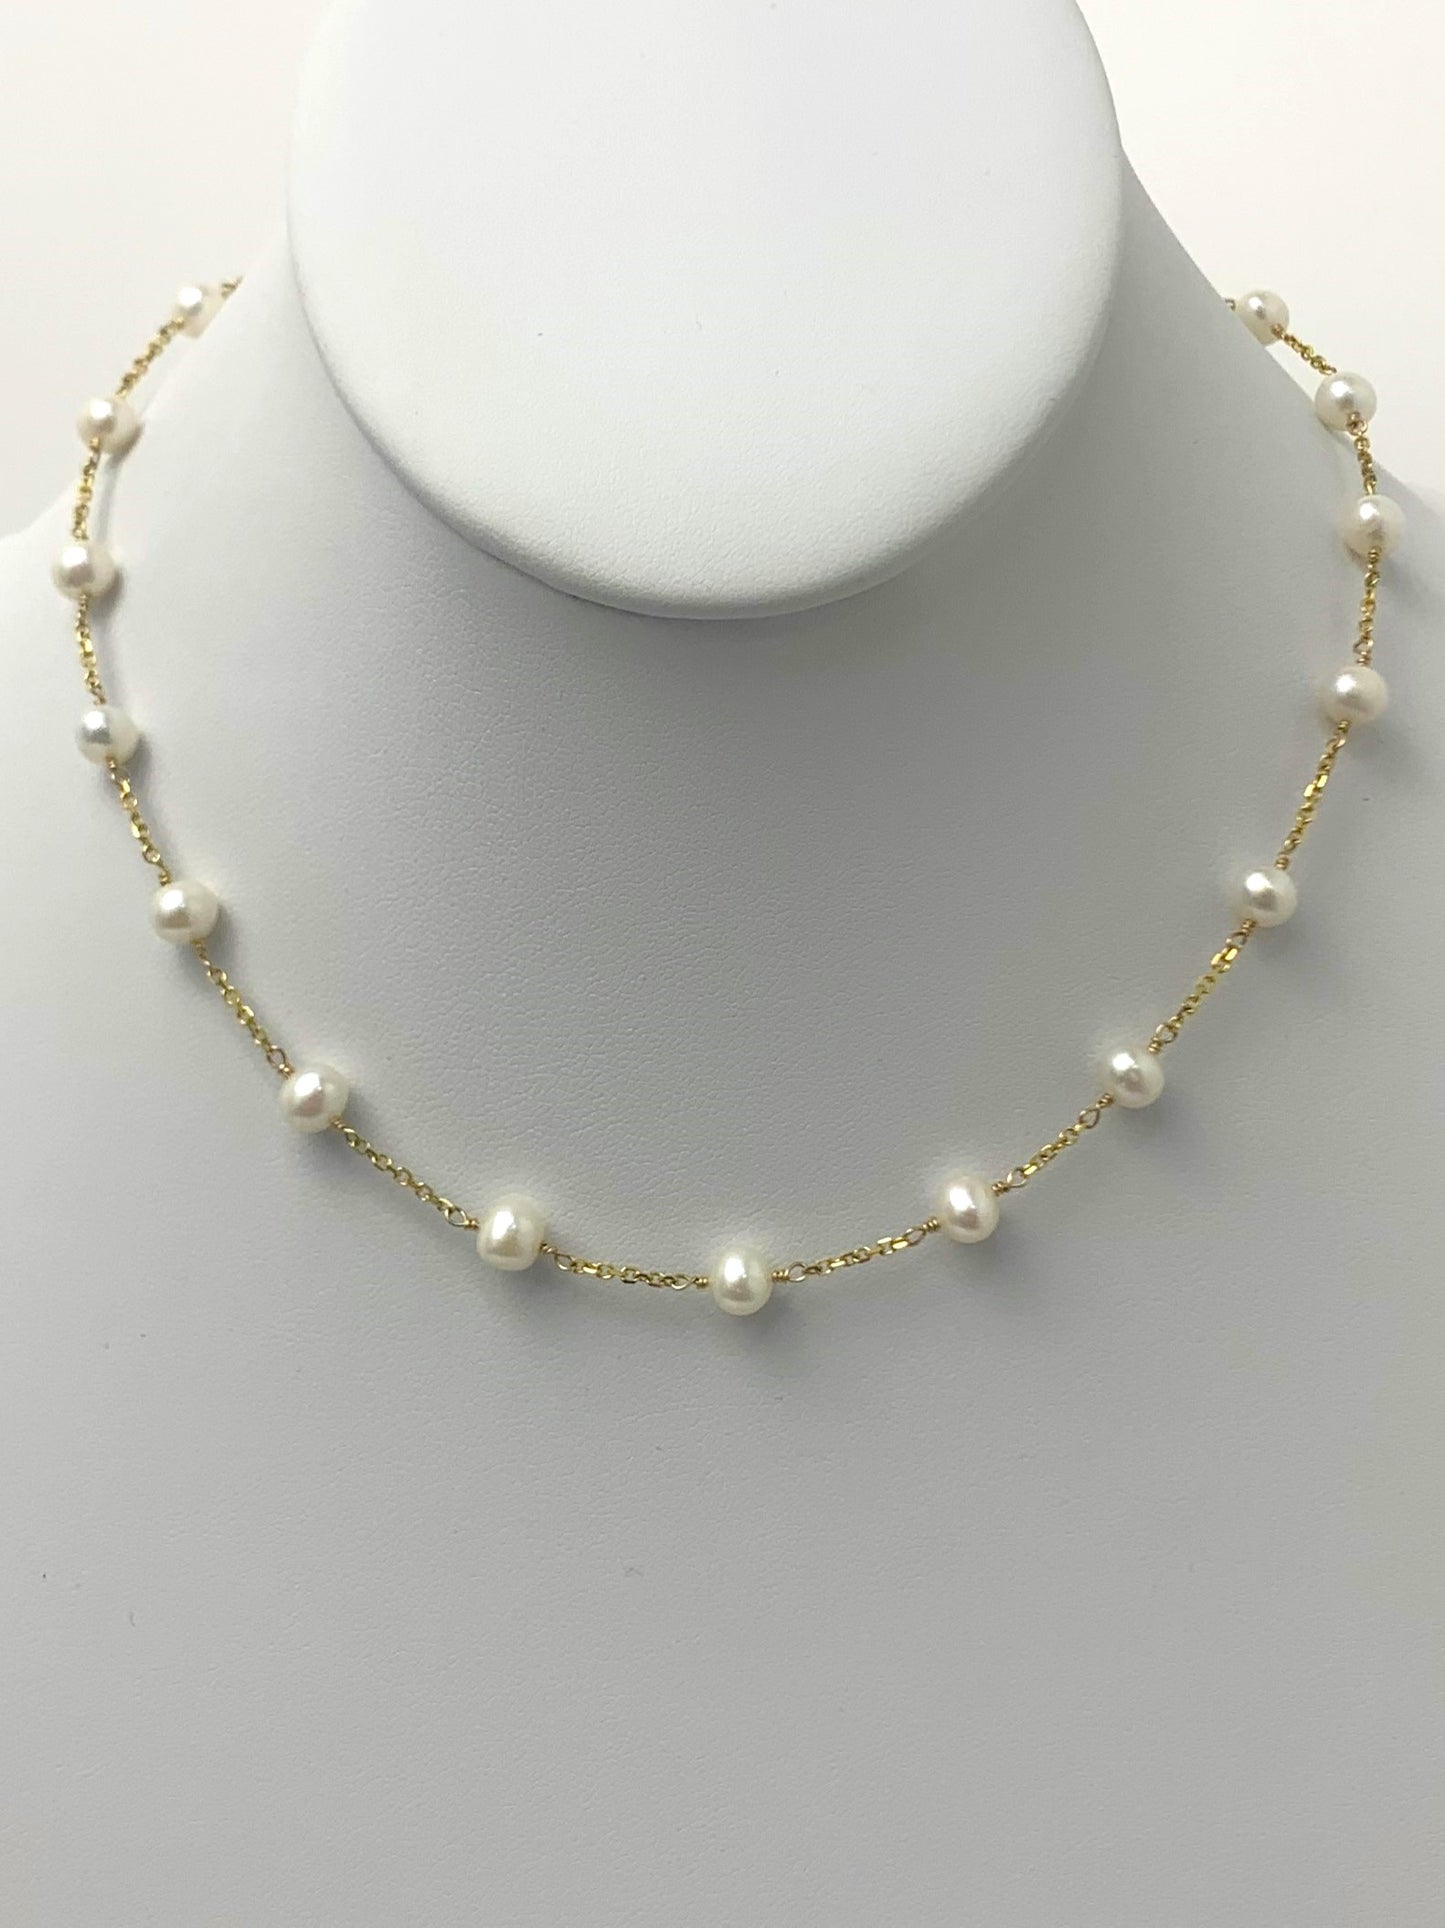 16" White Pearl Station Necklace in 14KY - NCK-039-TNCPR14Y-WH-16